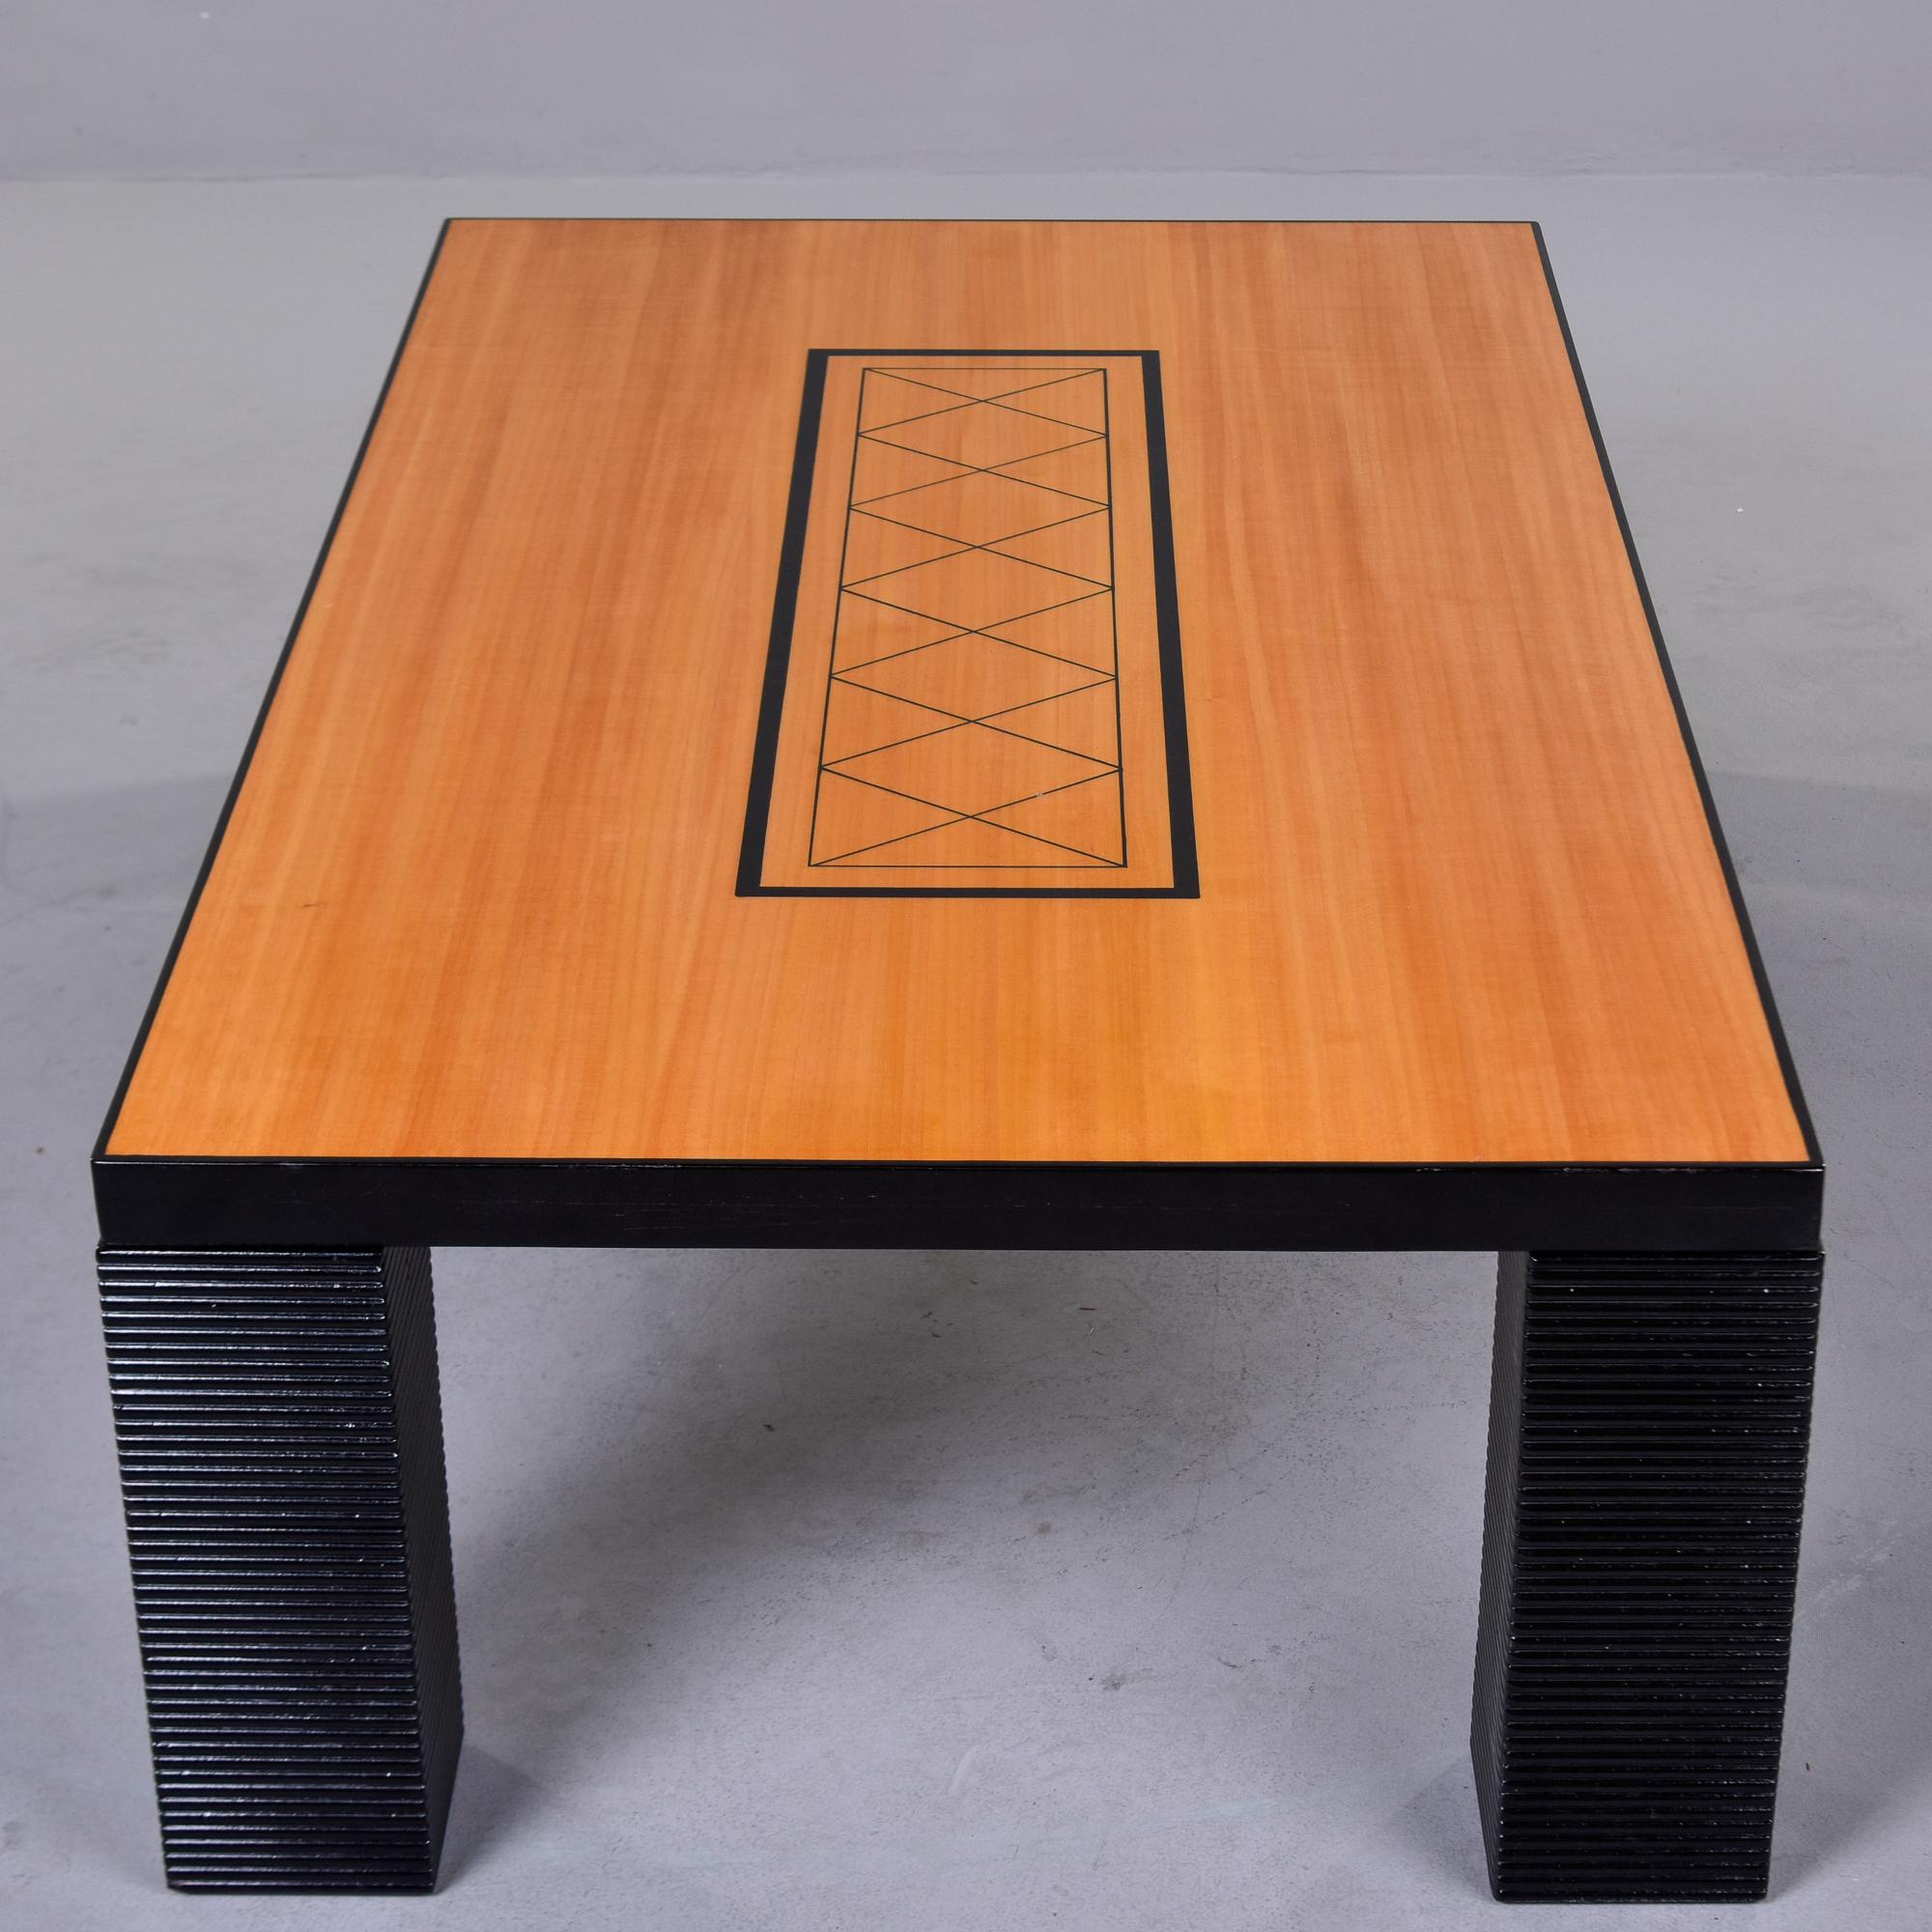 Oversized Italian Art Deco Birch and Black Coffee Table For Sale 3